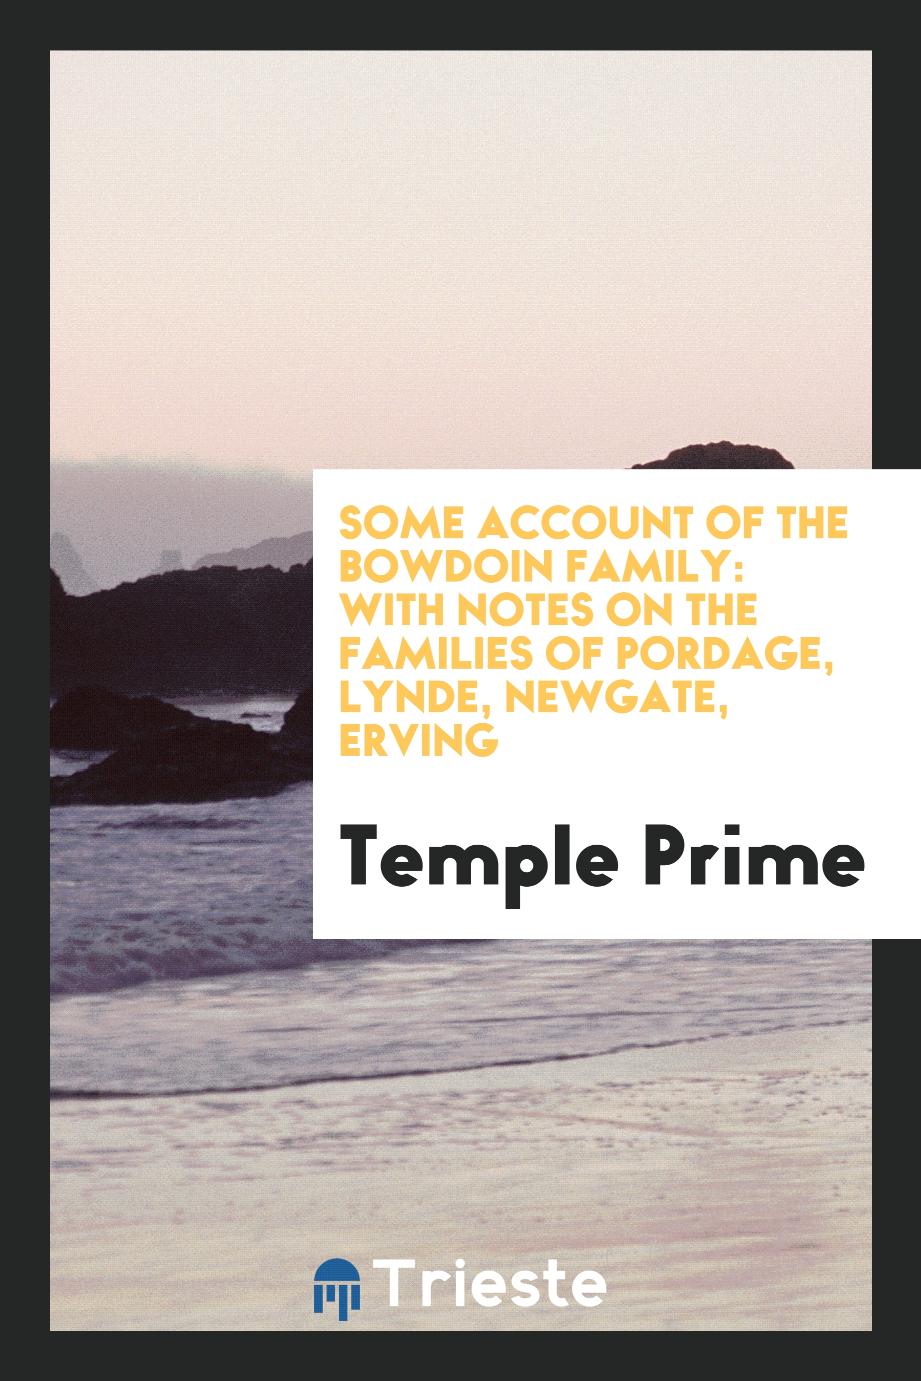 Temple Prime - Some Account of the Bowdoin Family: With Notes on the Families of Pordage, Lynde, Newgate, Erving